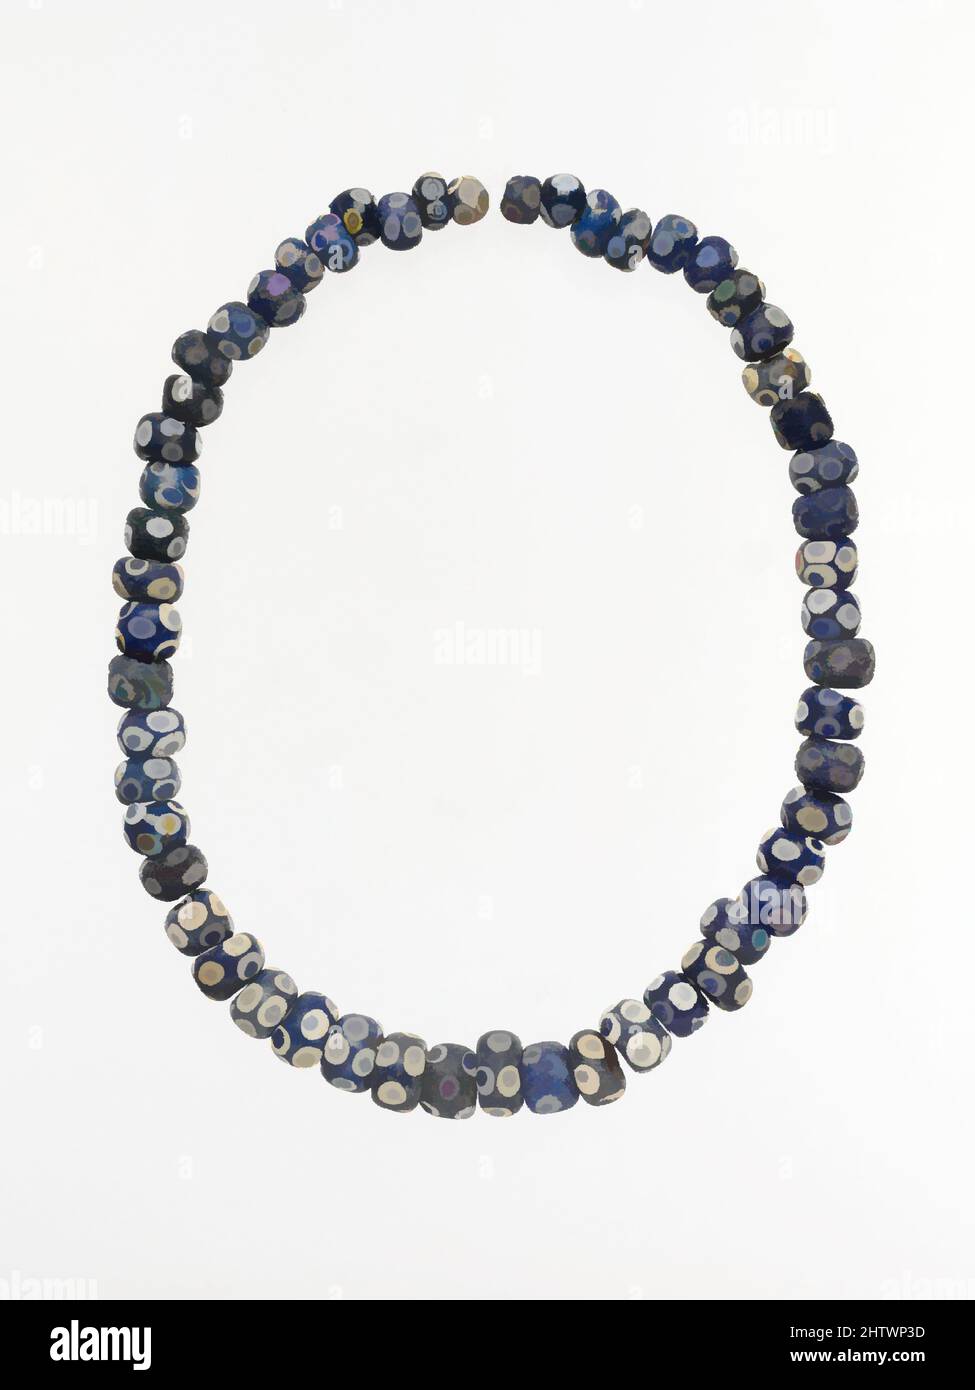 Art inspired by Glass eye beads, Archaic or Classical, 6th–4th century B.C., Greek, Eastern Mediterranean, Glass; rod-formed, 18 in. (45.7 cm), Glass, Graded blue and white eye-beads, Classic works modernized by Artotop with a splash of modernity. Shapes, color and value, eye-catching visual impact on art. Emotions through freedom of artworks in a contemporary way. A timeless message pursuing a wildly creative new direction. Artists turning to the digital medium and creating the Artotop NFT Stock Photo